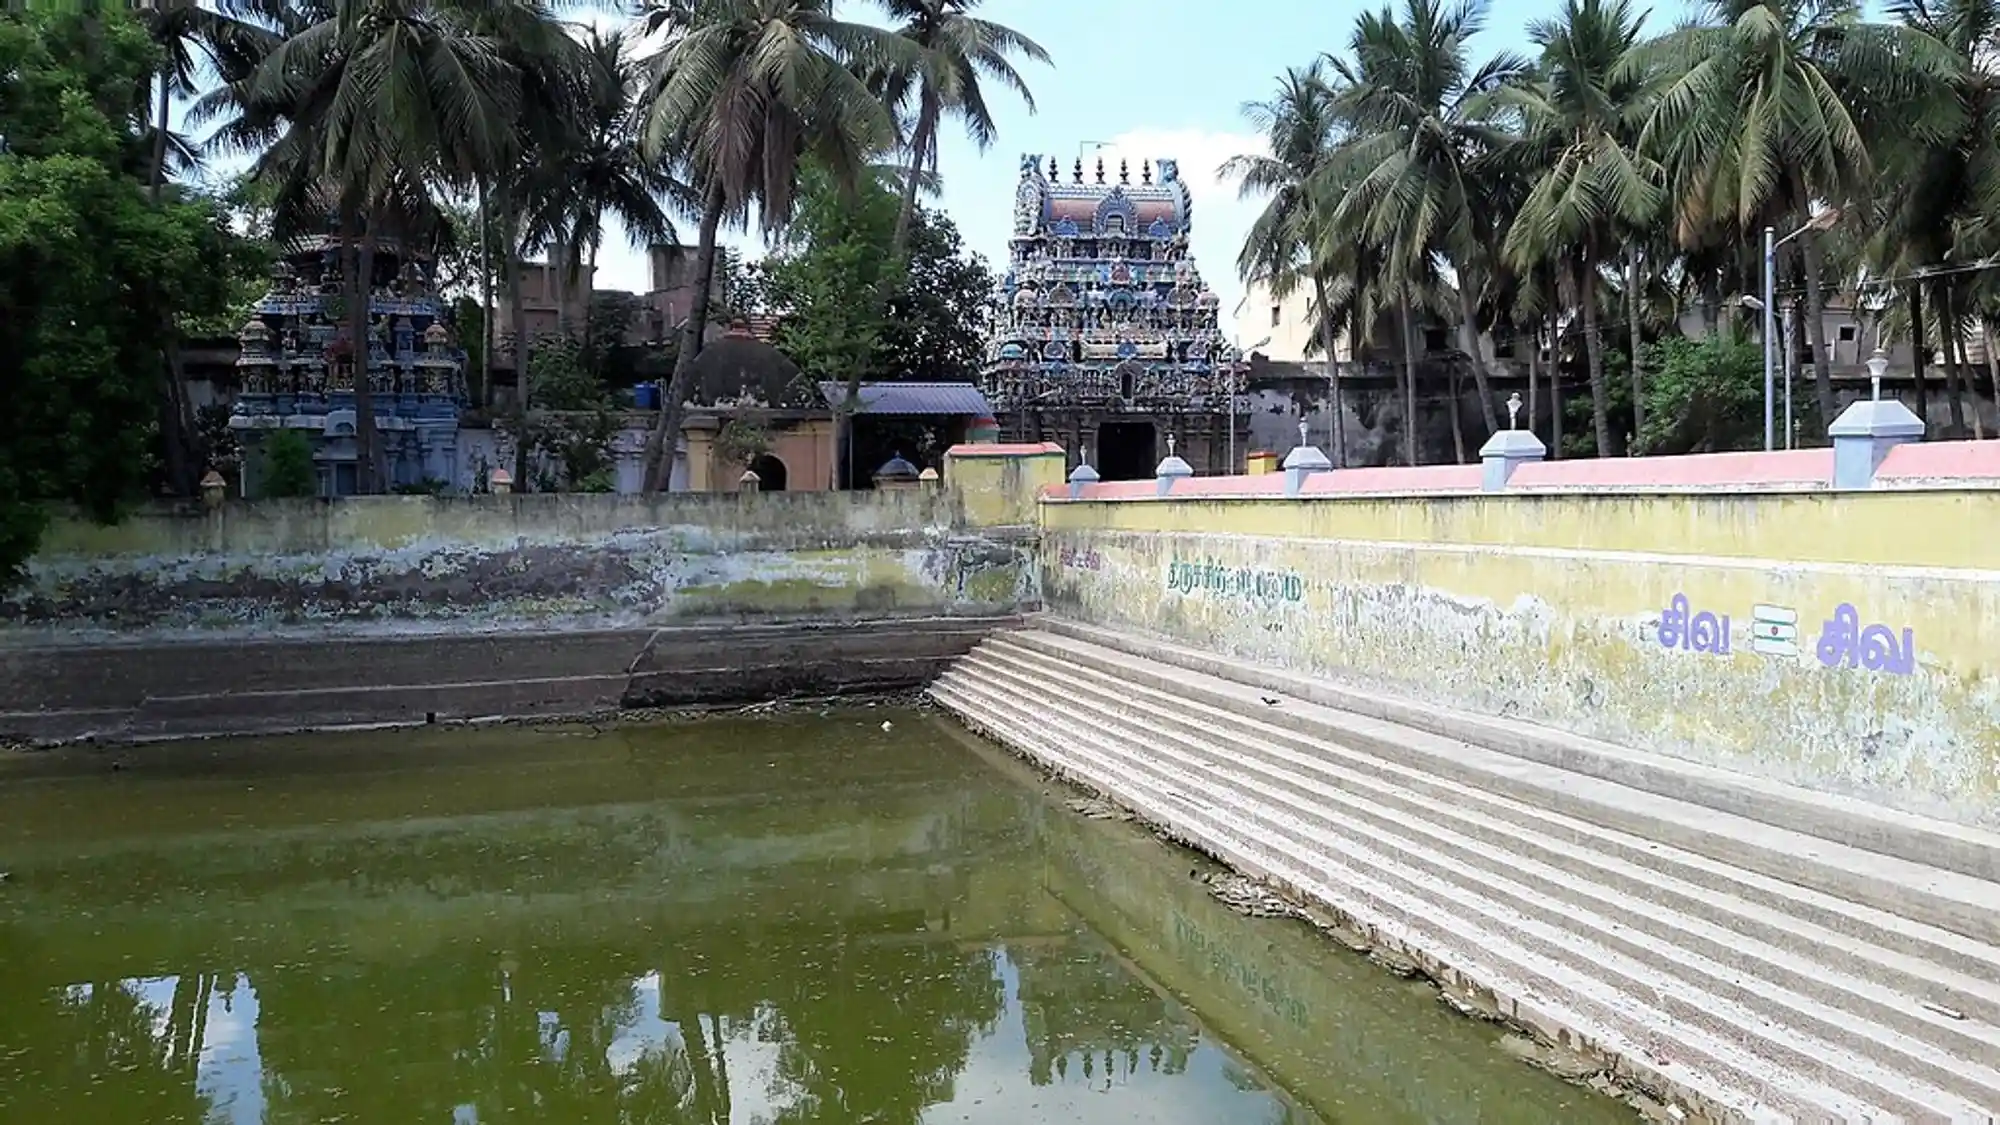 The Temple Tank I Source: Wikimedia Commons